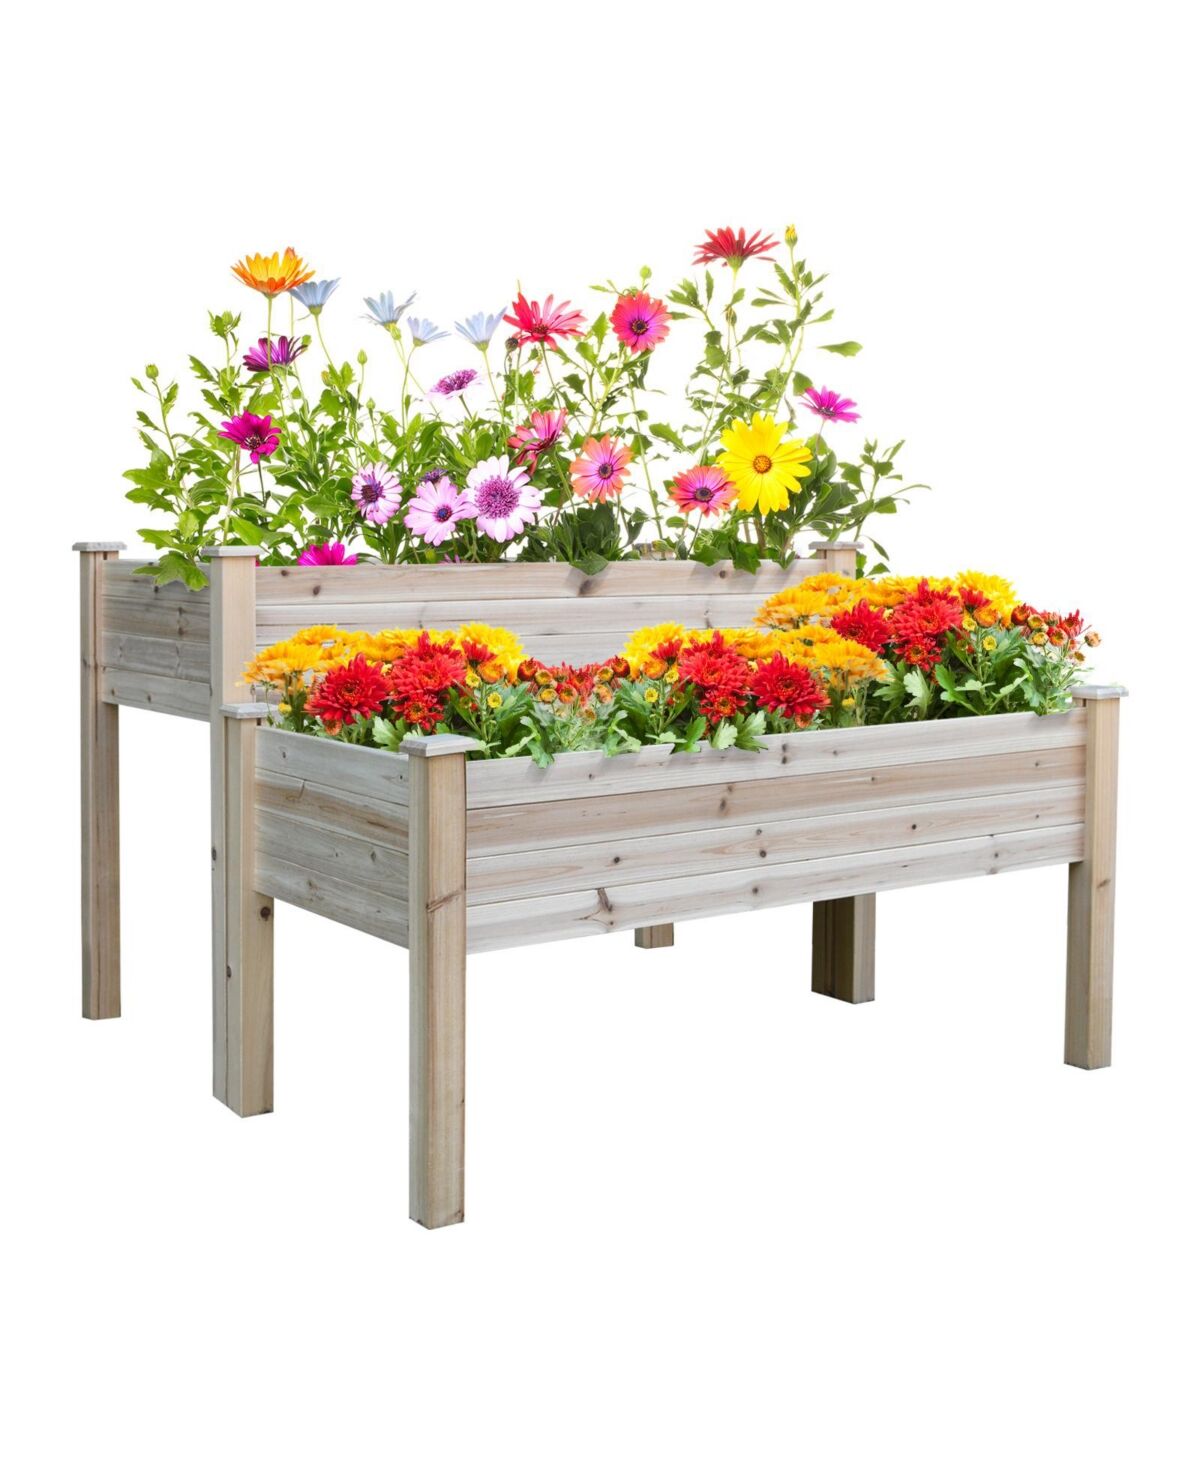 Outsunny Outdoor/Indoor Raised Garden Bed Elevated Wooden Planter Box - Natural